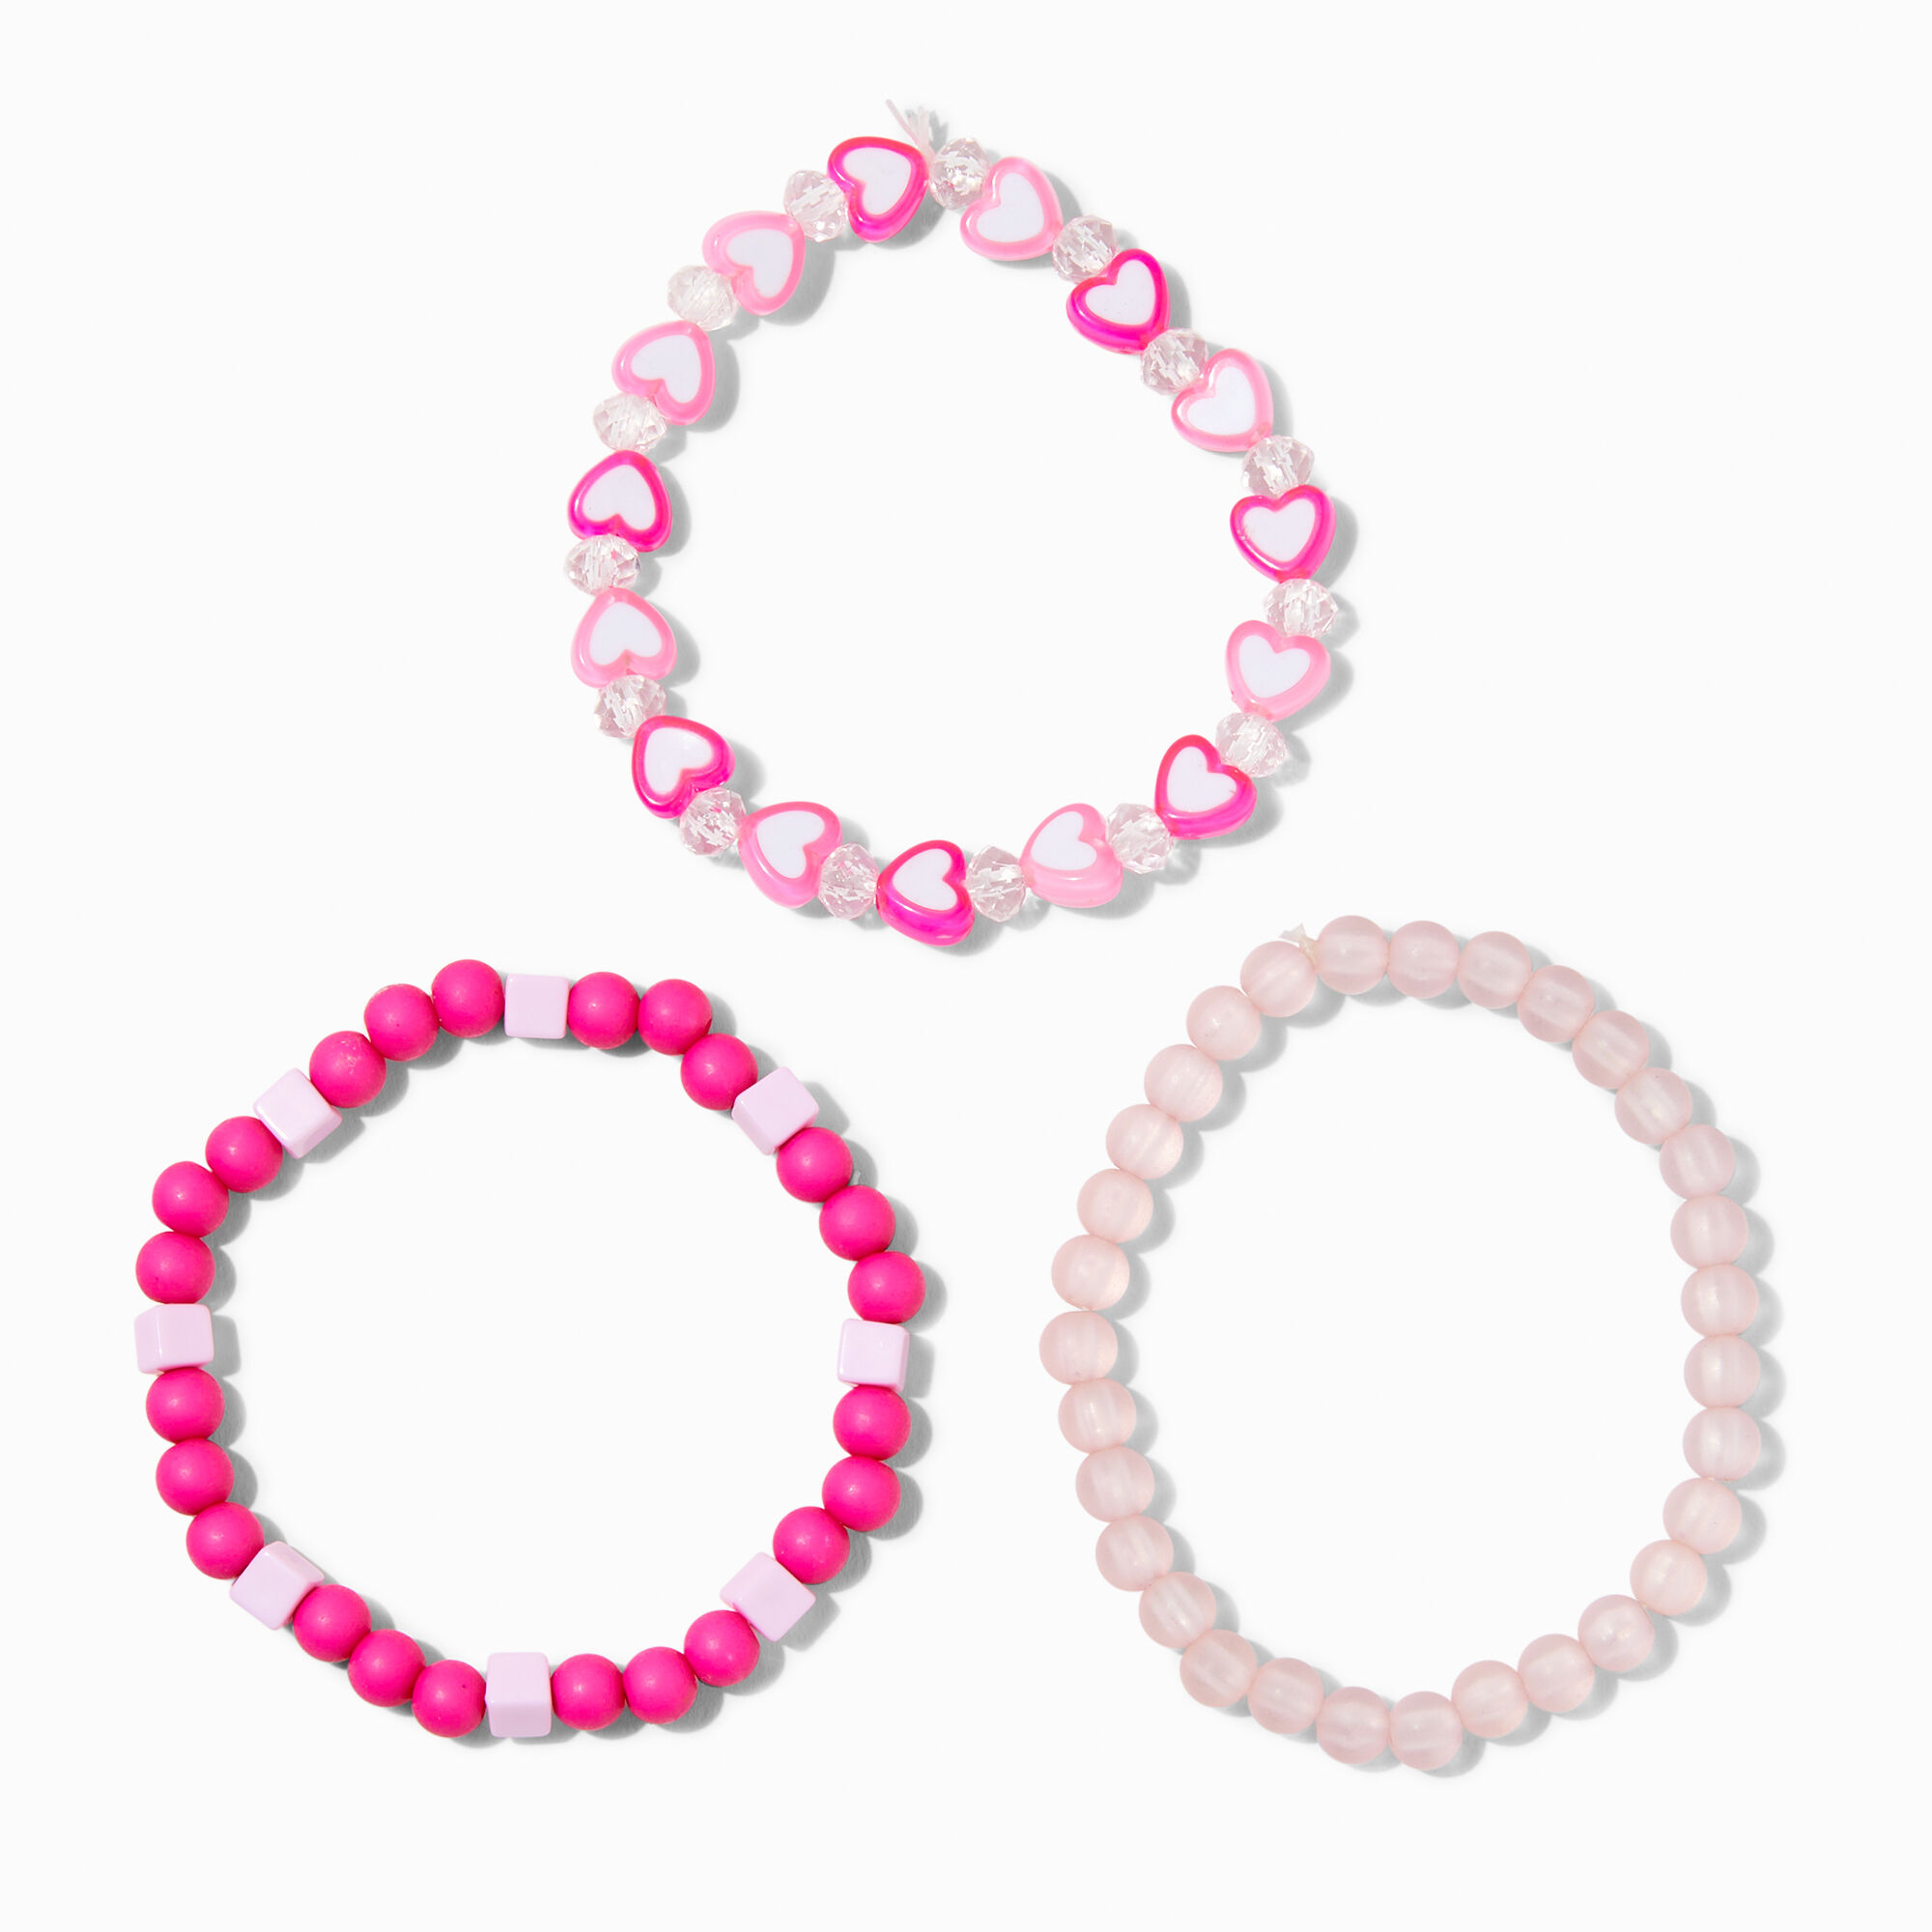 Breast Cancer Bracelet from Lokai on Generous Goods